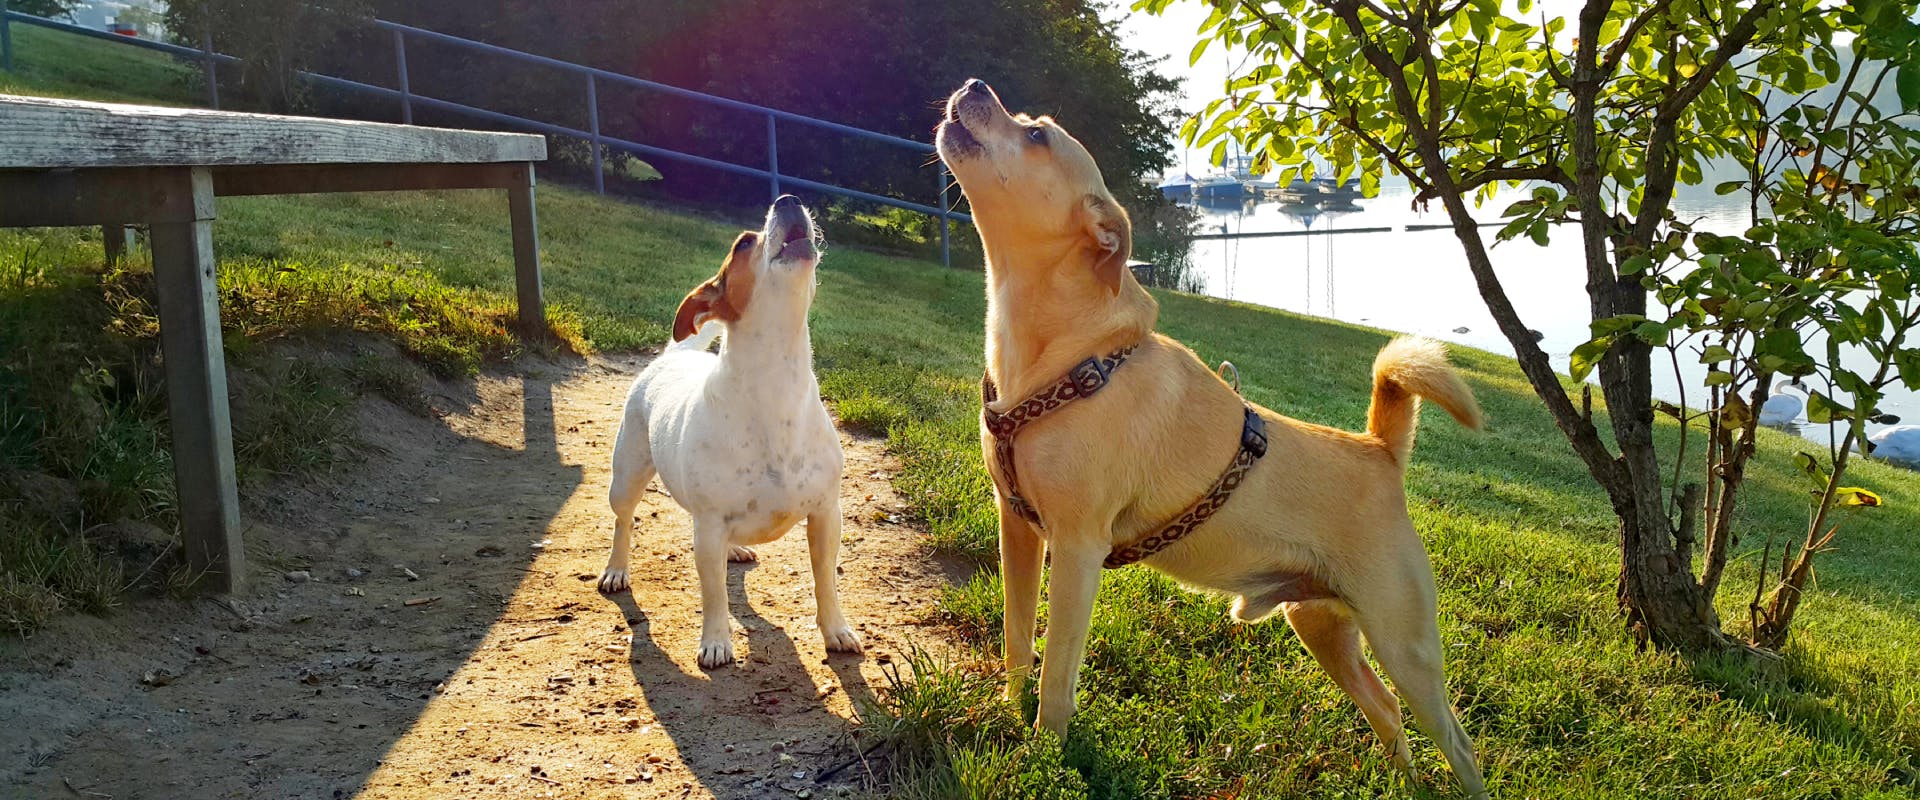 two small dogs in a park stood next to each other and both howling together